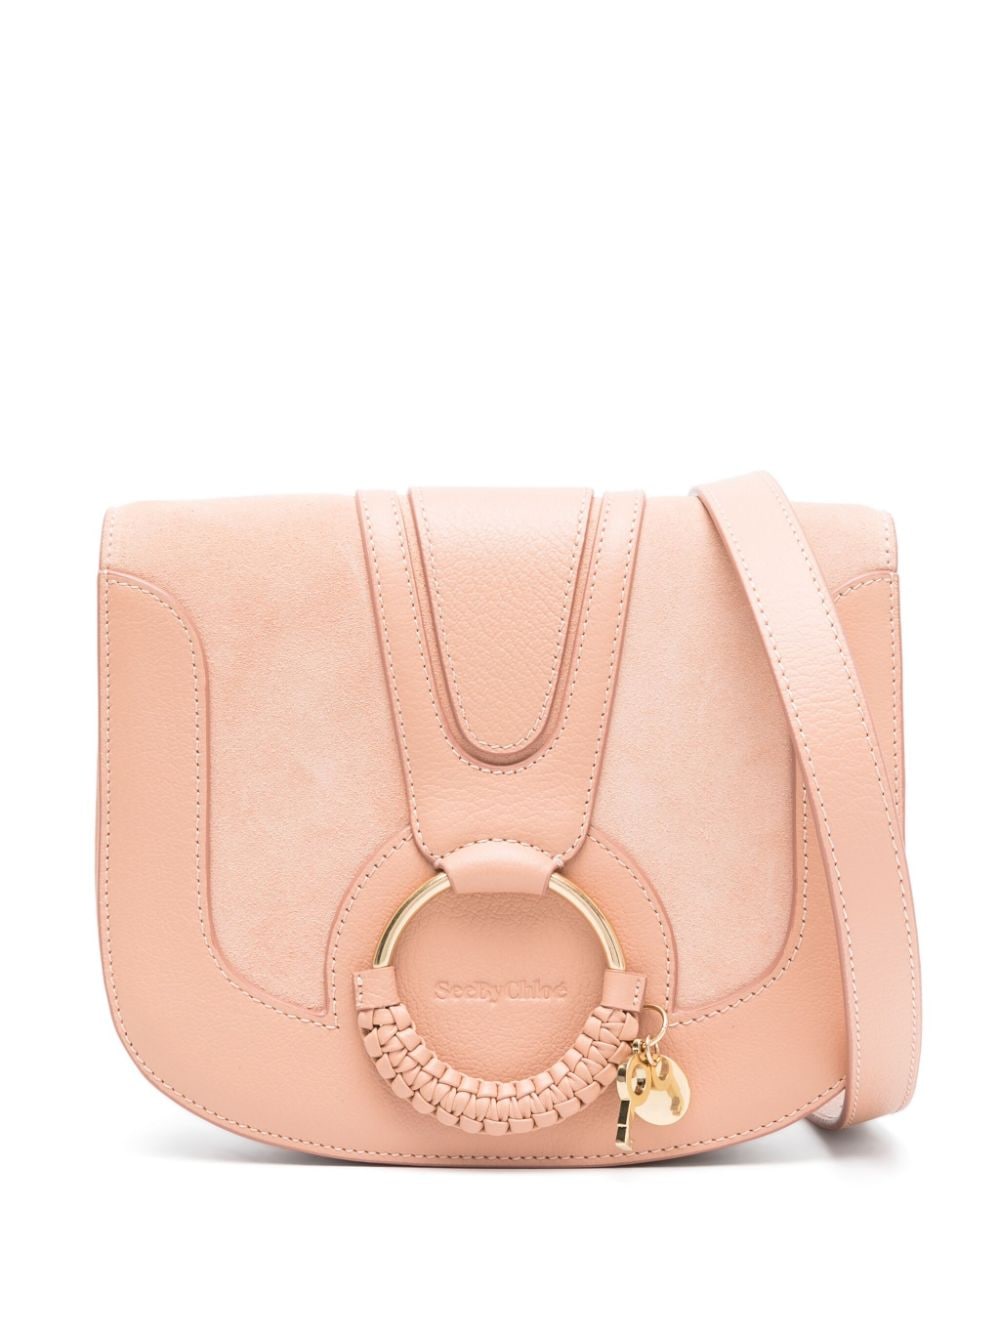 See by Chloé mini Hana leather bag - Pink von See by Chloé